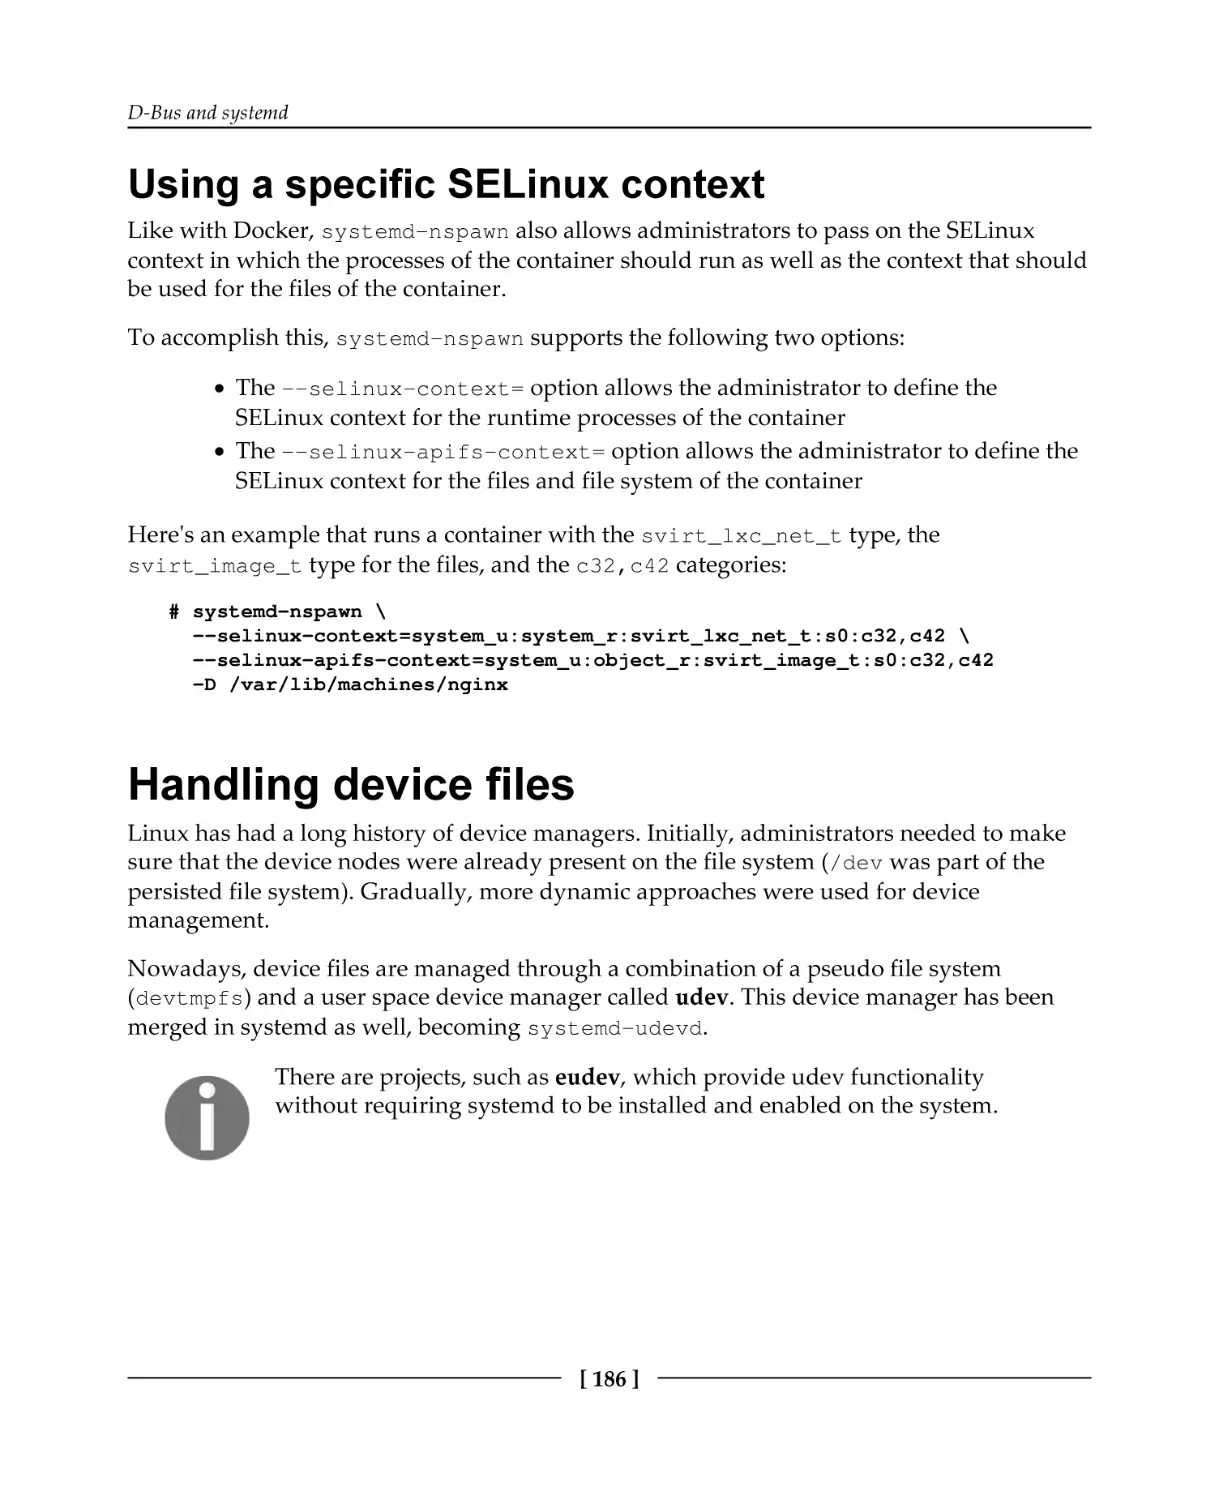 Using a specific SELinux context
Handling device files